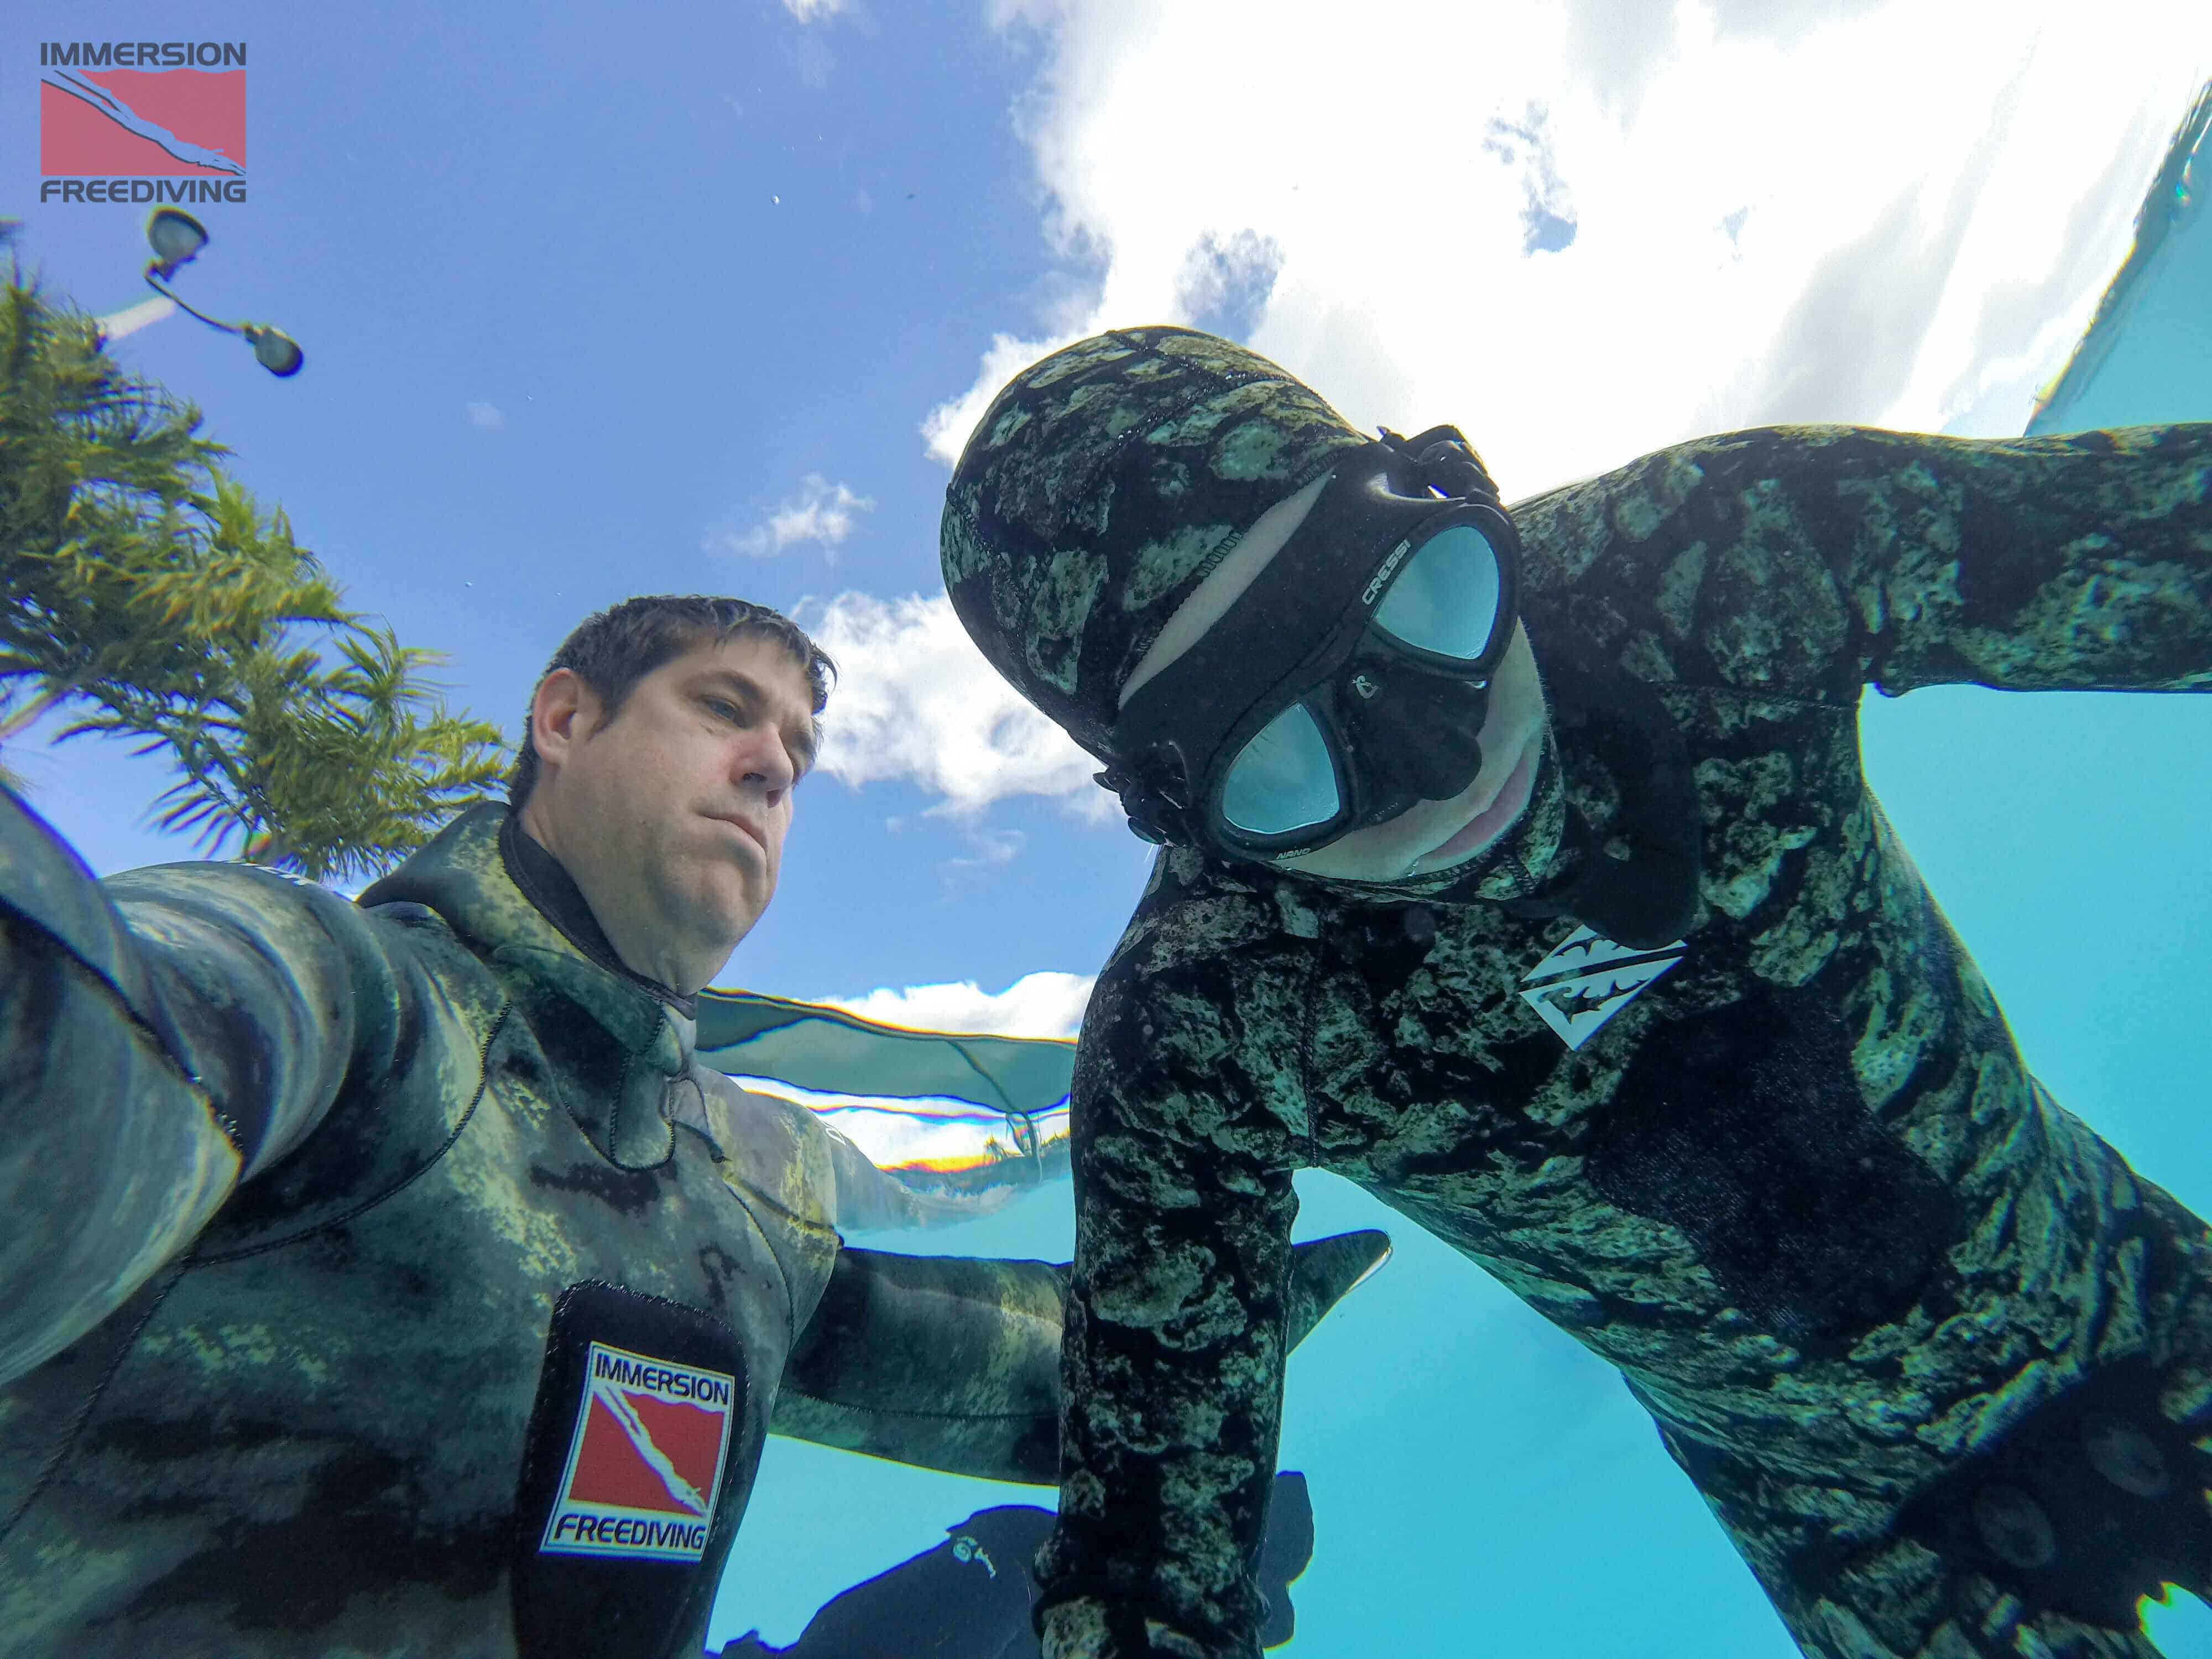 Learning how to properly equalize is critical to freediving spearfishing.